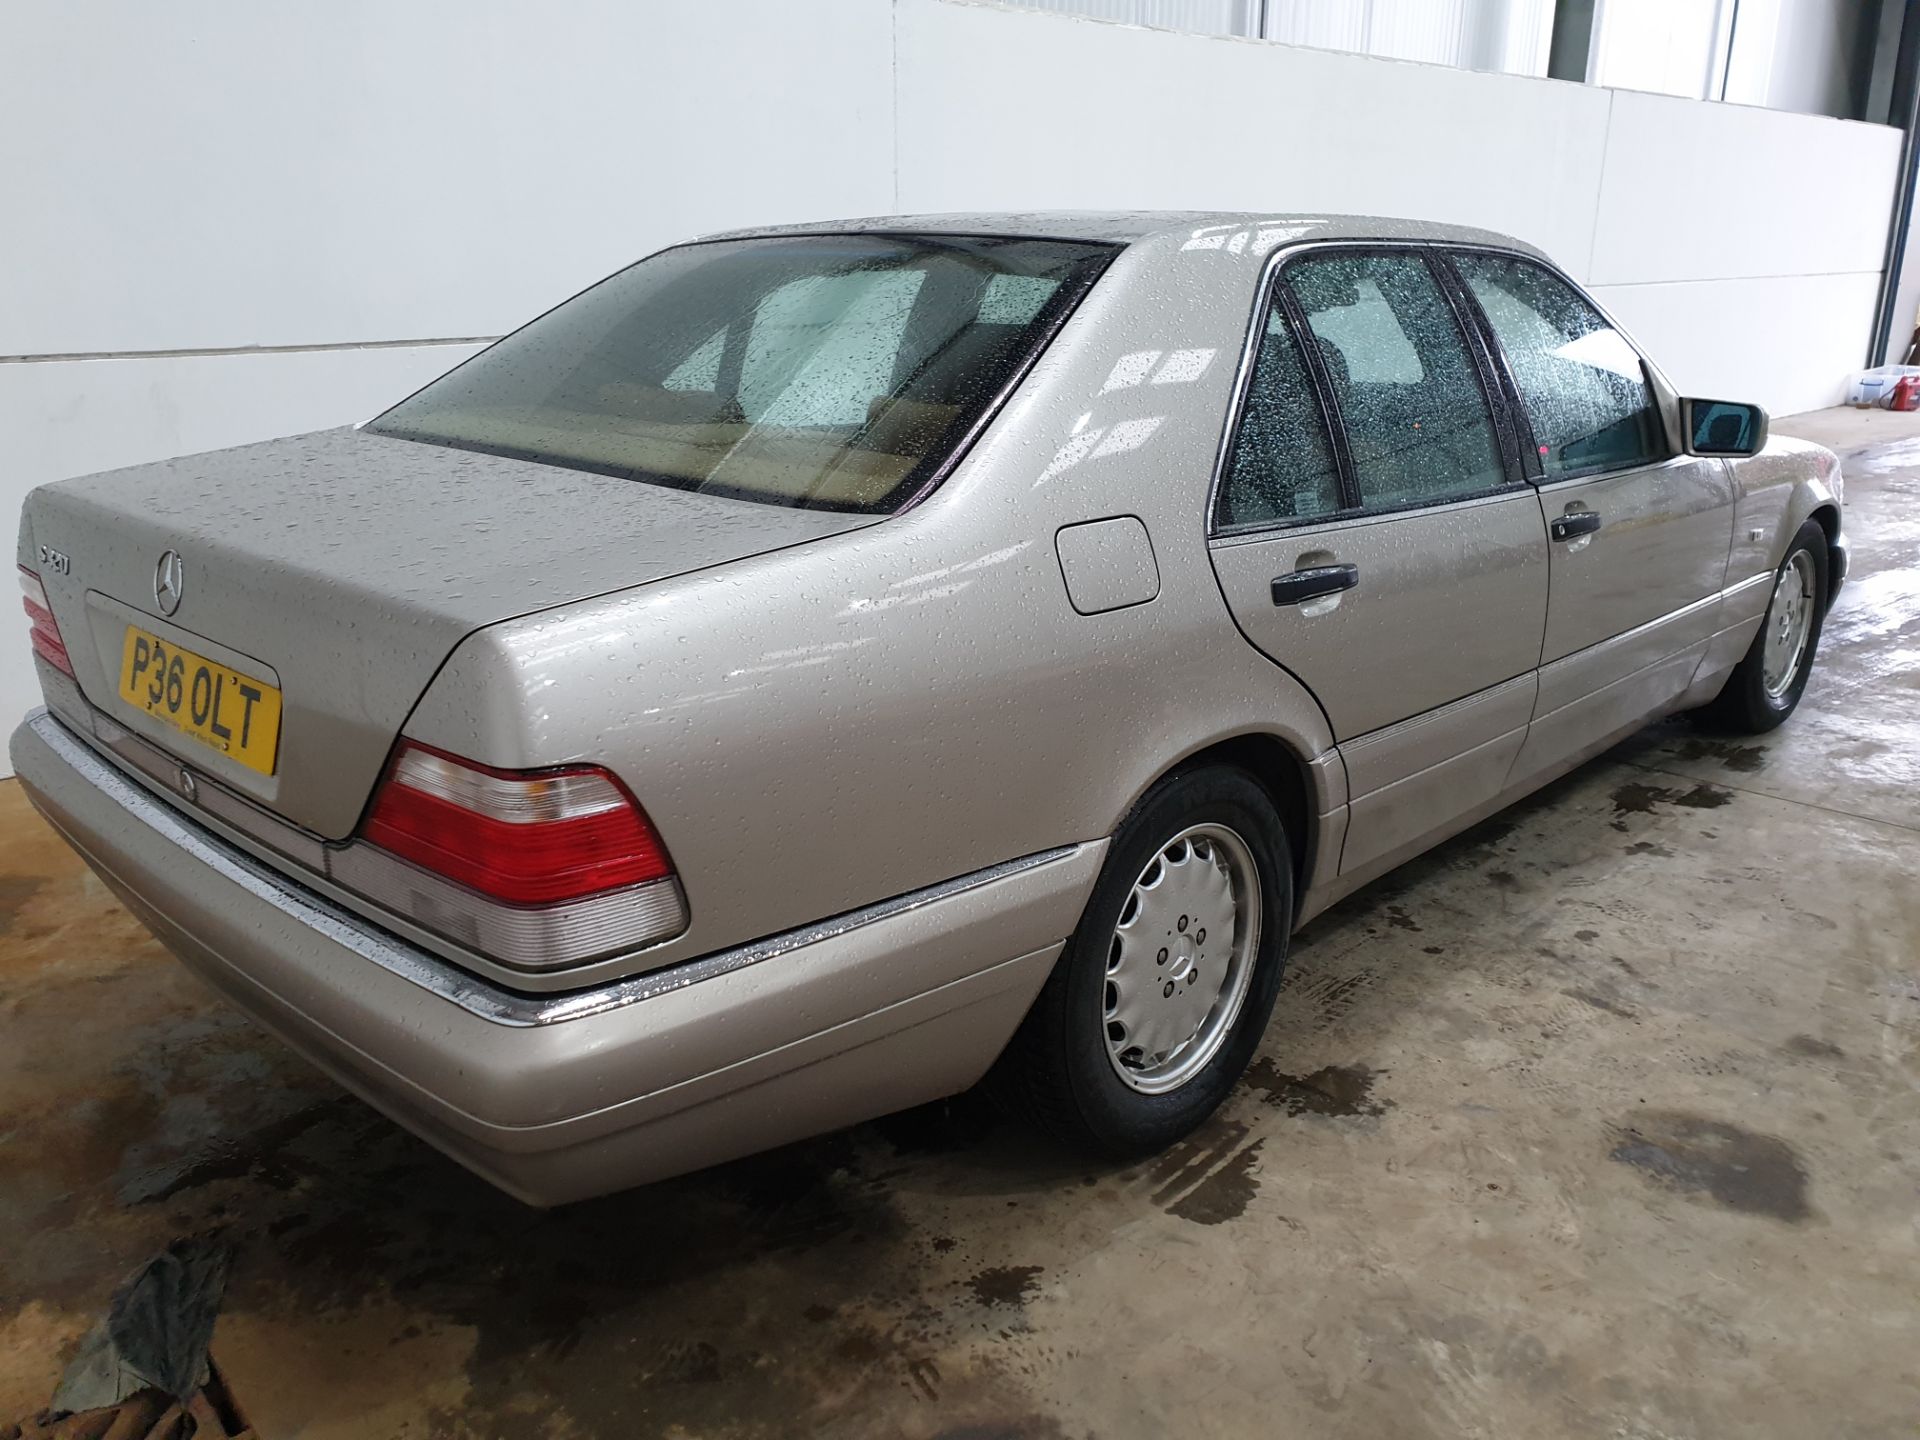 1996 Mercedes S320 - Image 3 of 16